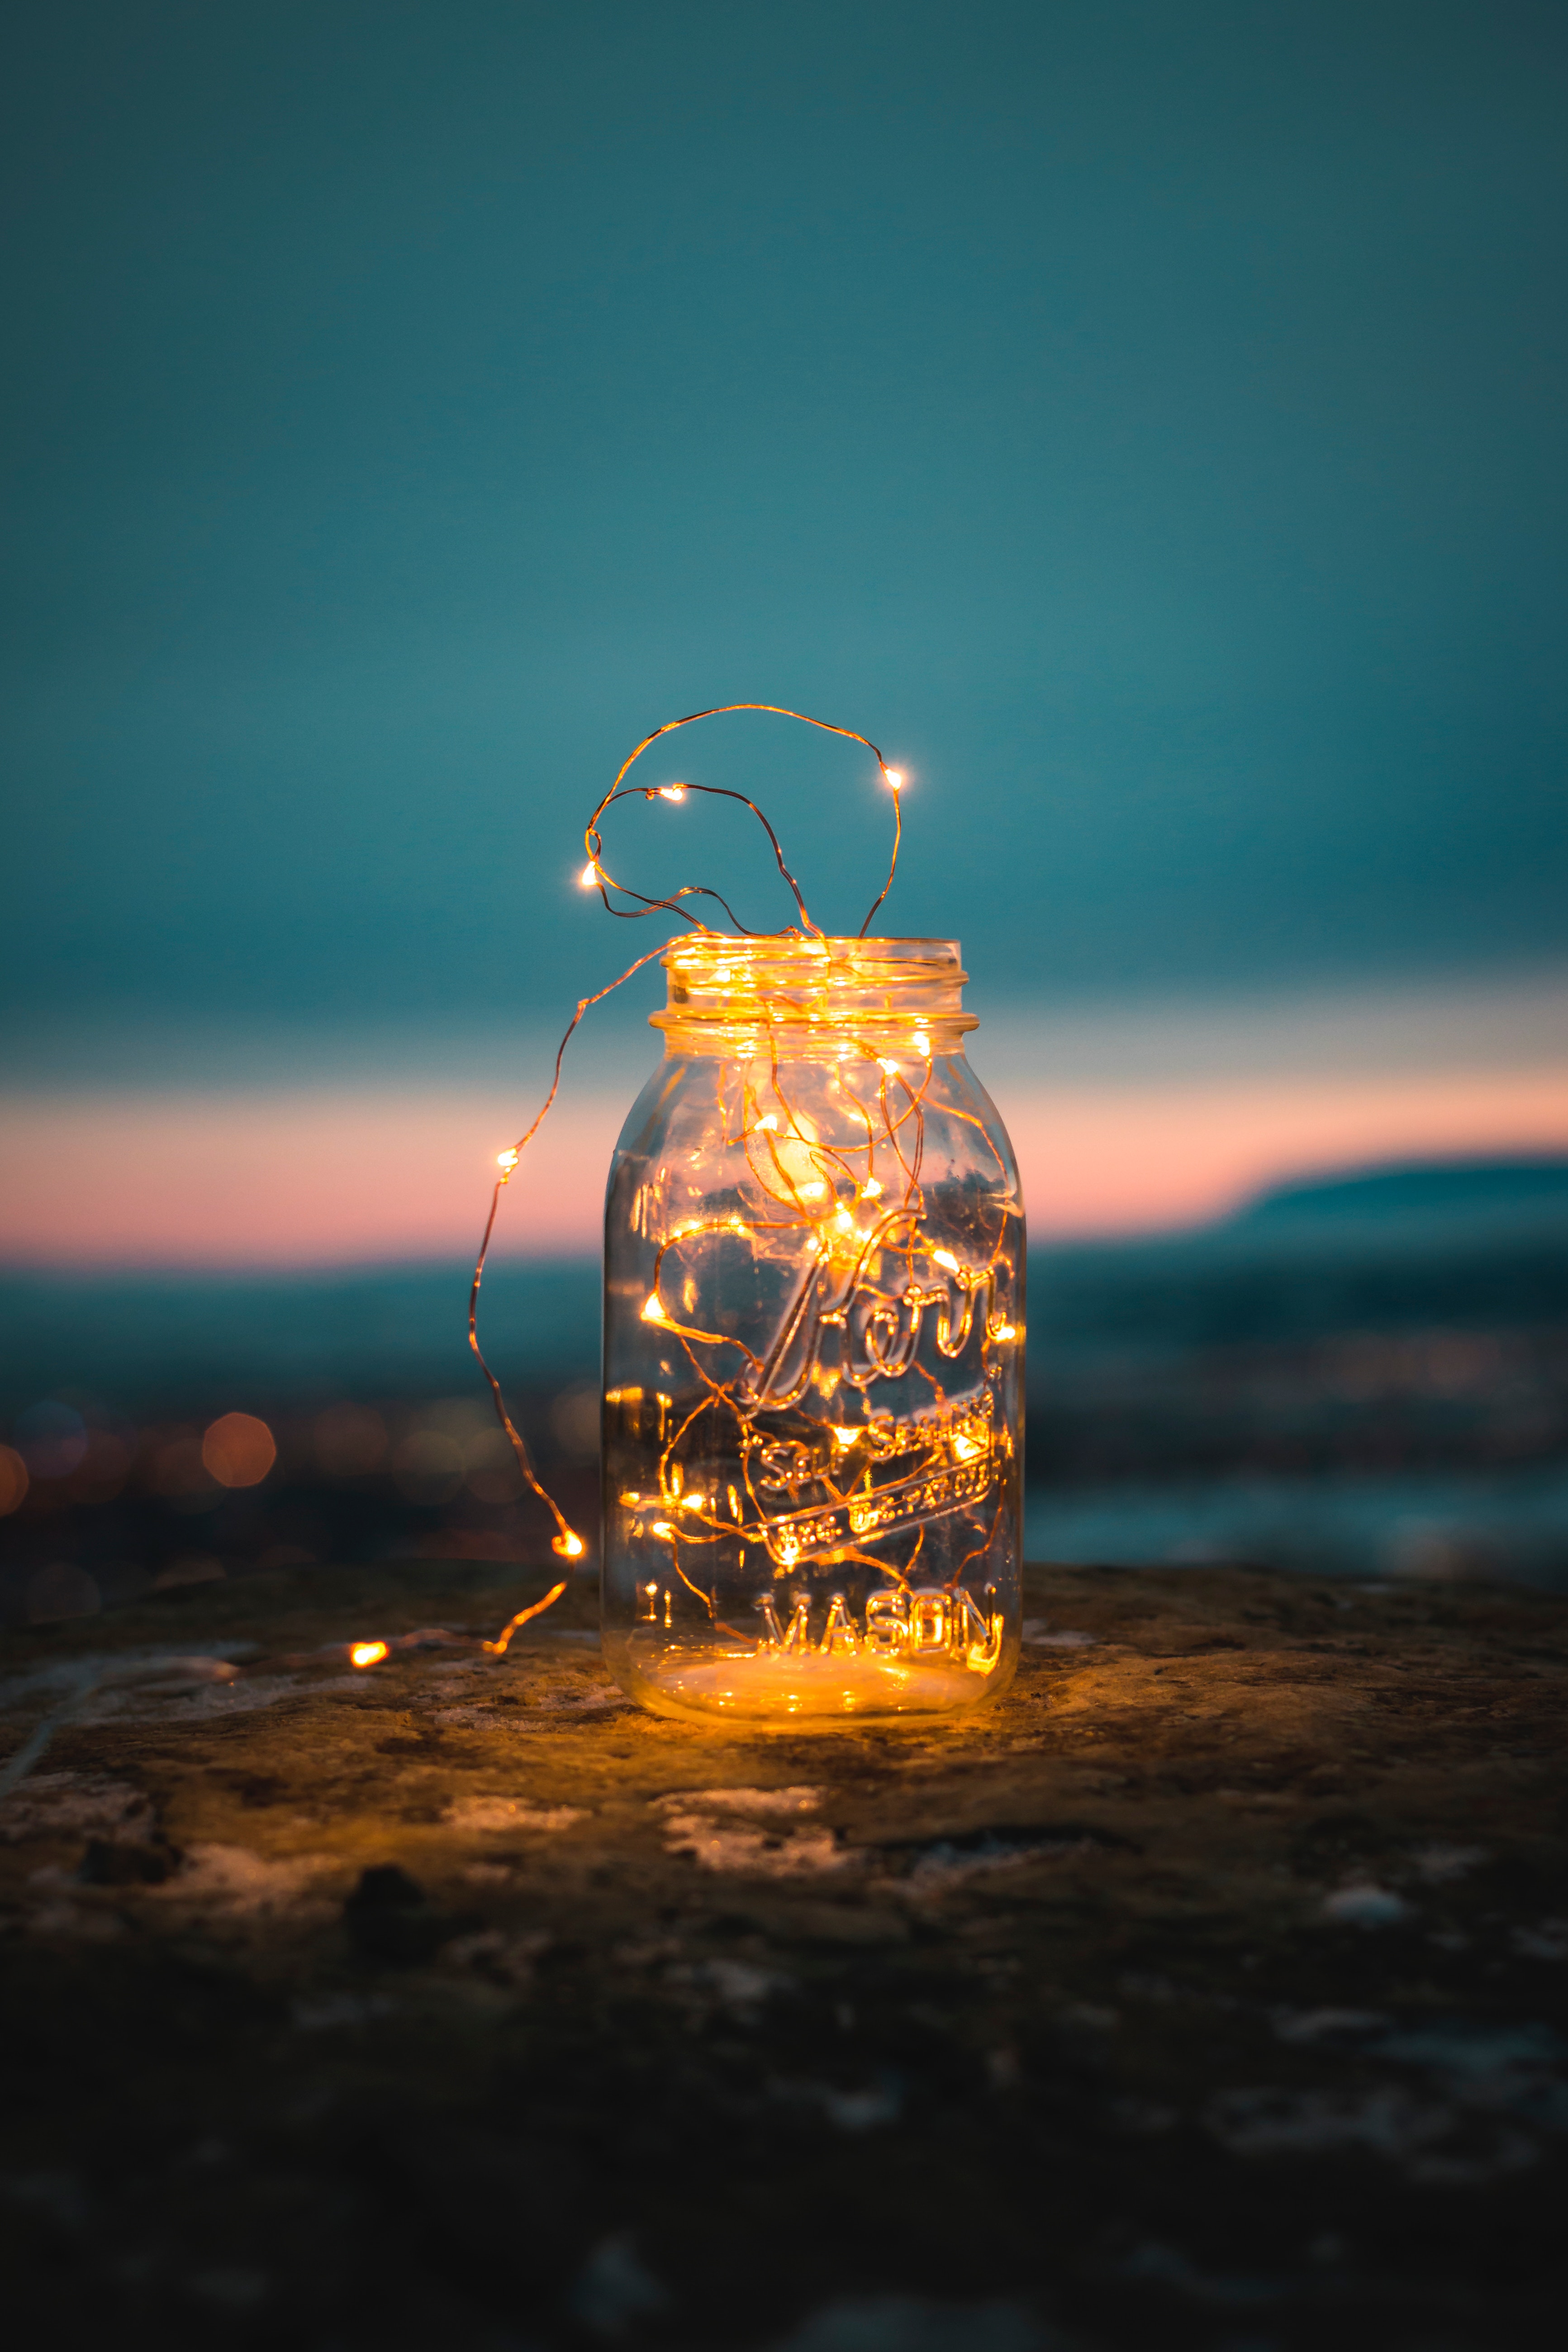 153139 download wallpaper miscellaneous, garland, bank, shine, light, miscellanea, jar screensavers and pictures for free